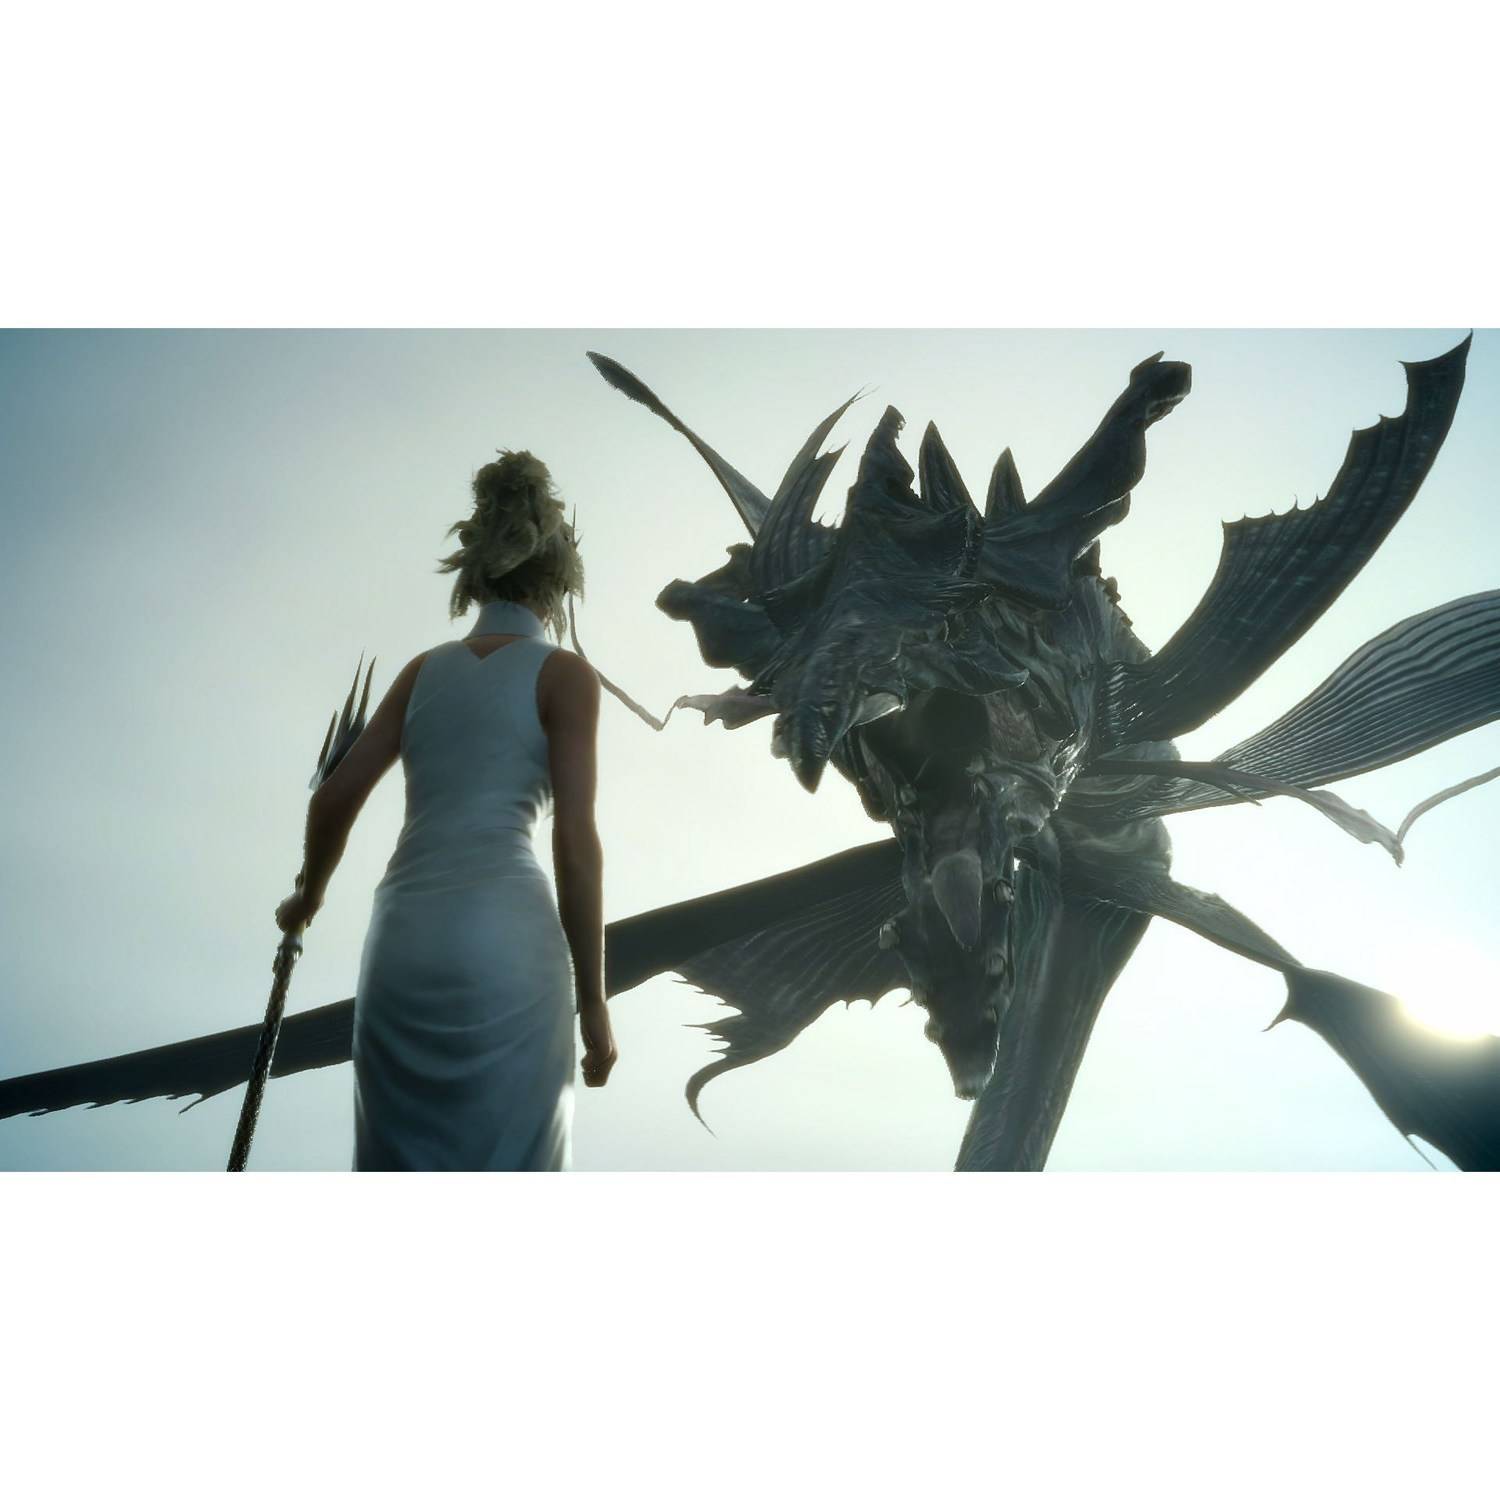 Final Fantasy XV for Xbox One - image 4 of 25